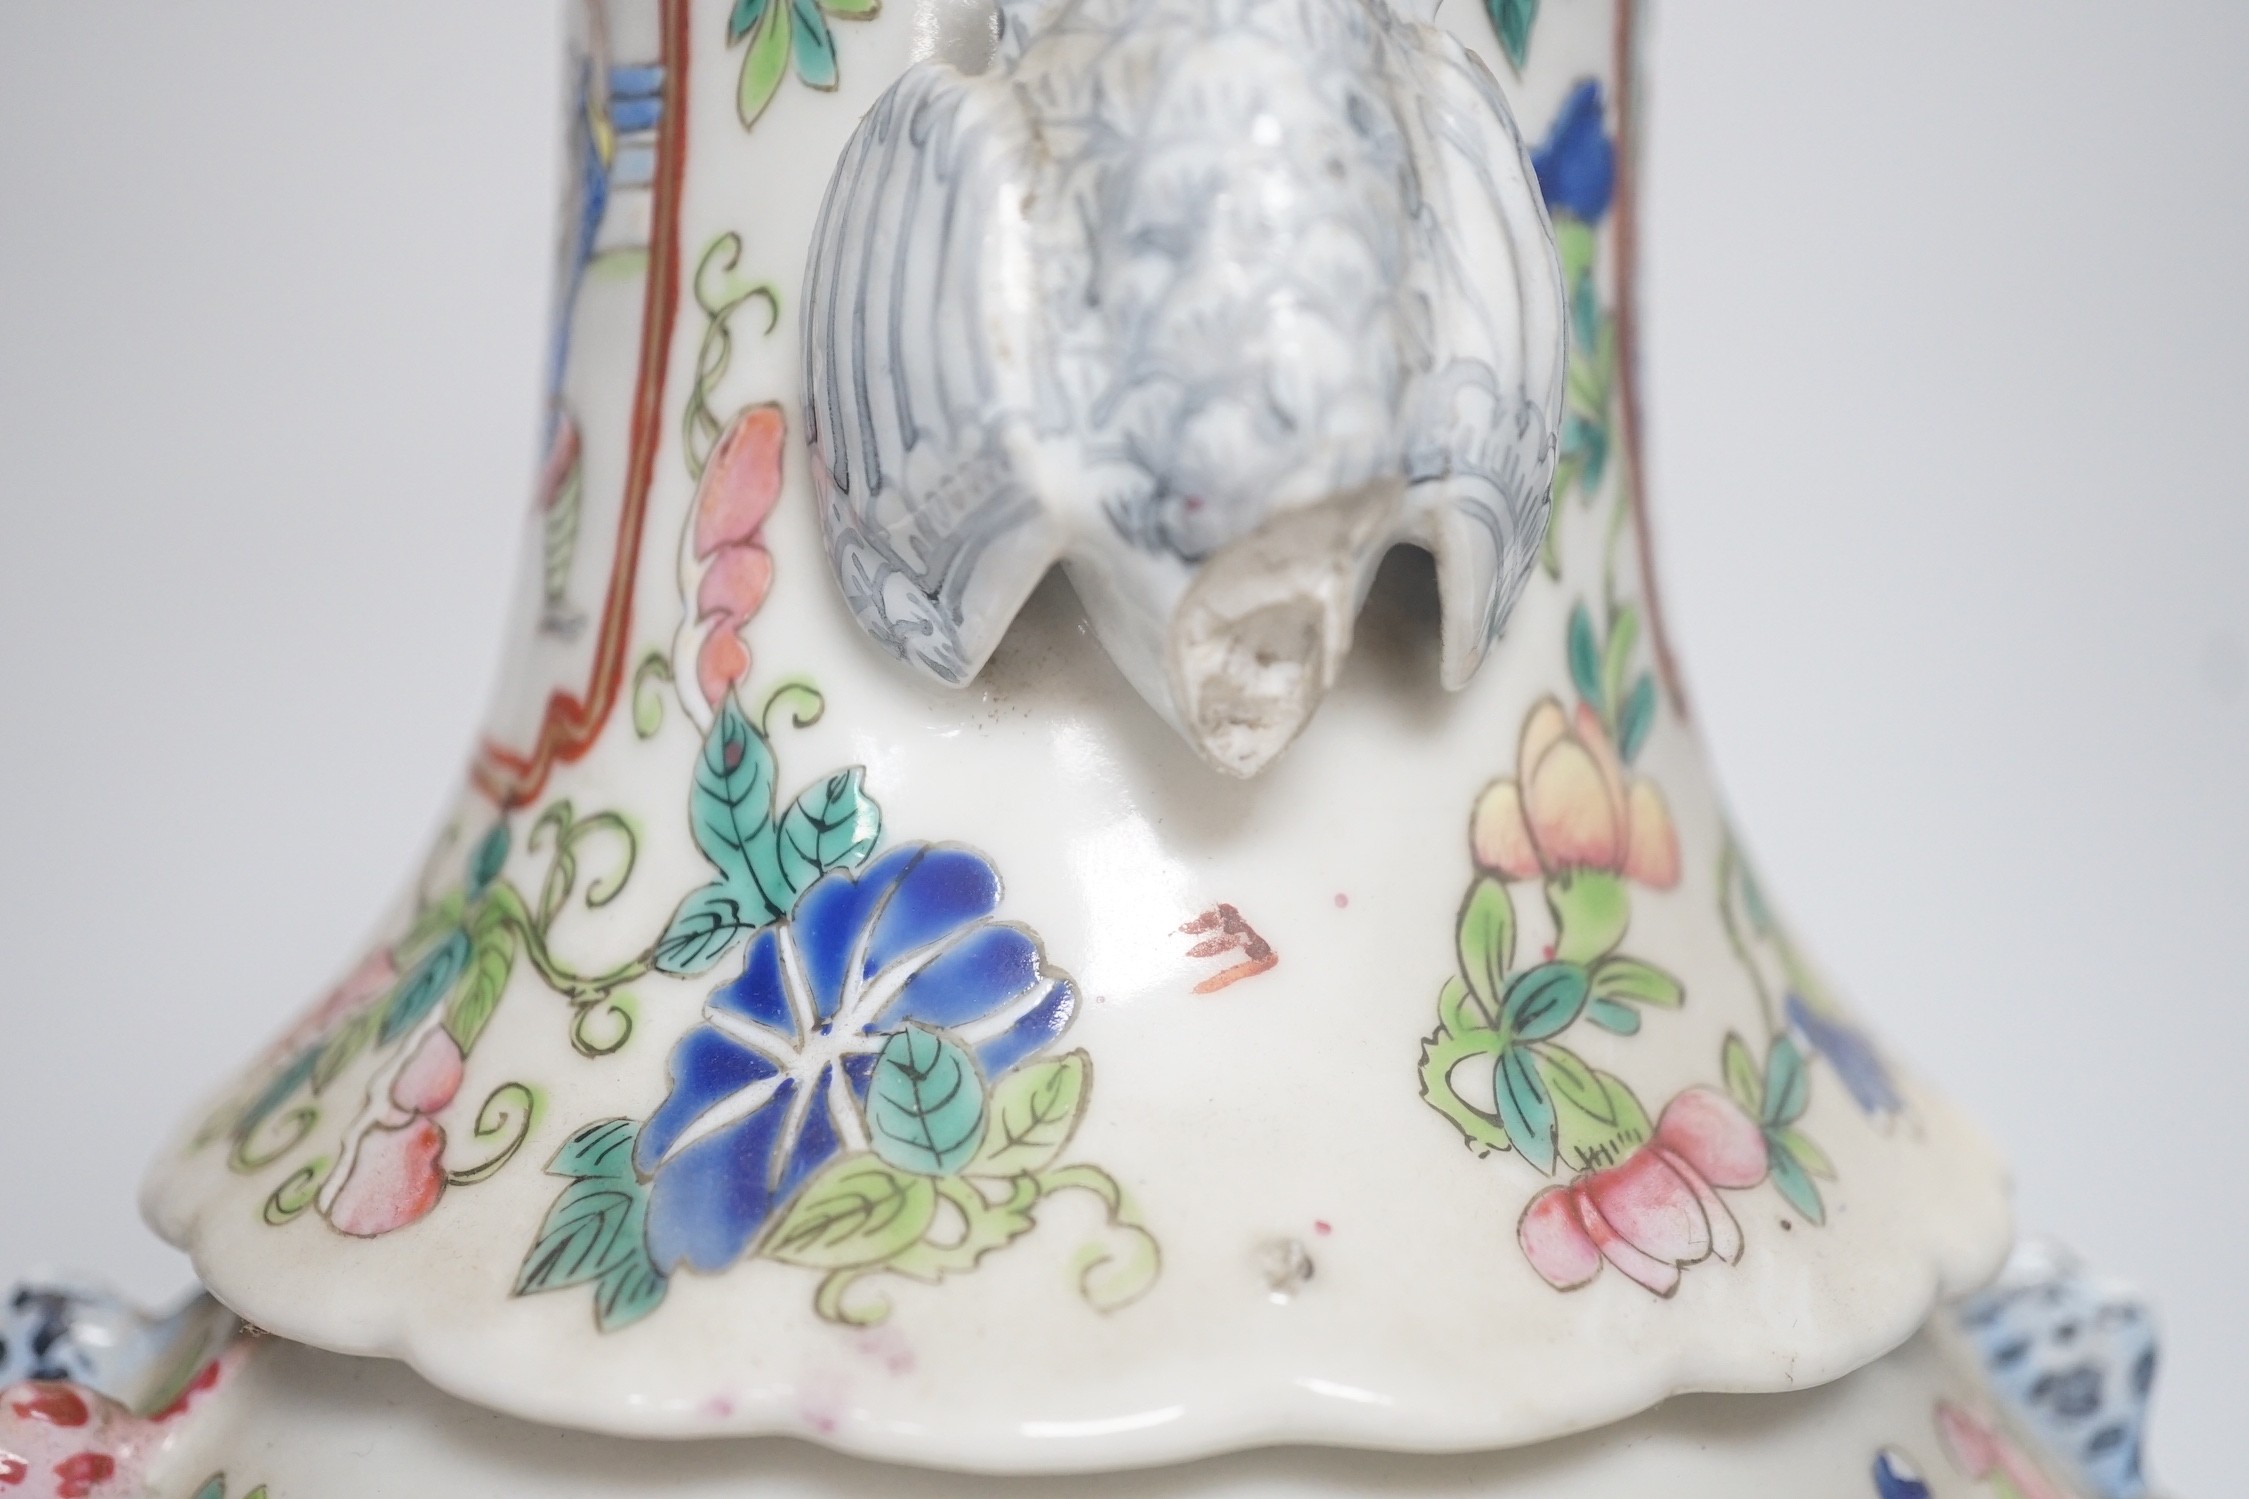 A 19th century Chinese famille rose vase, 42cm